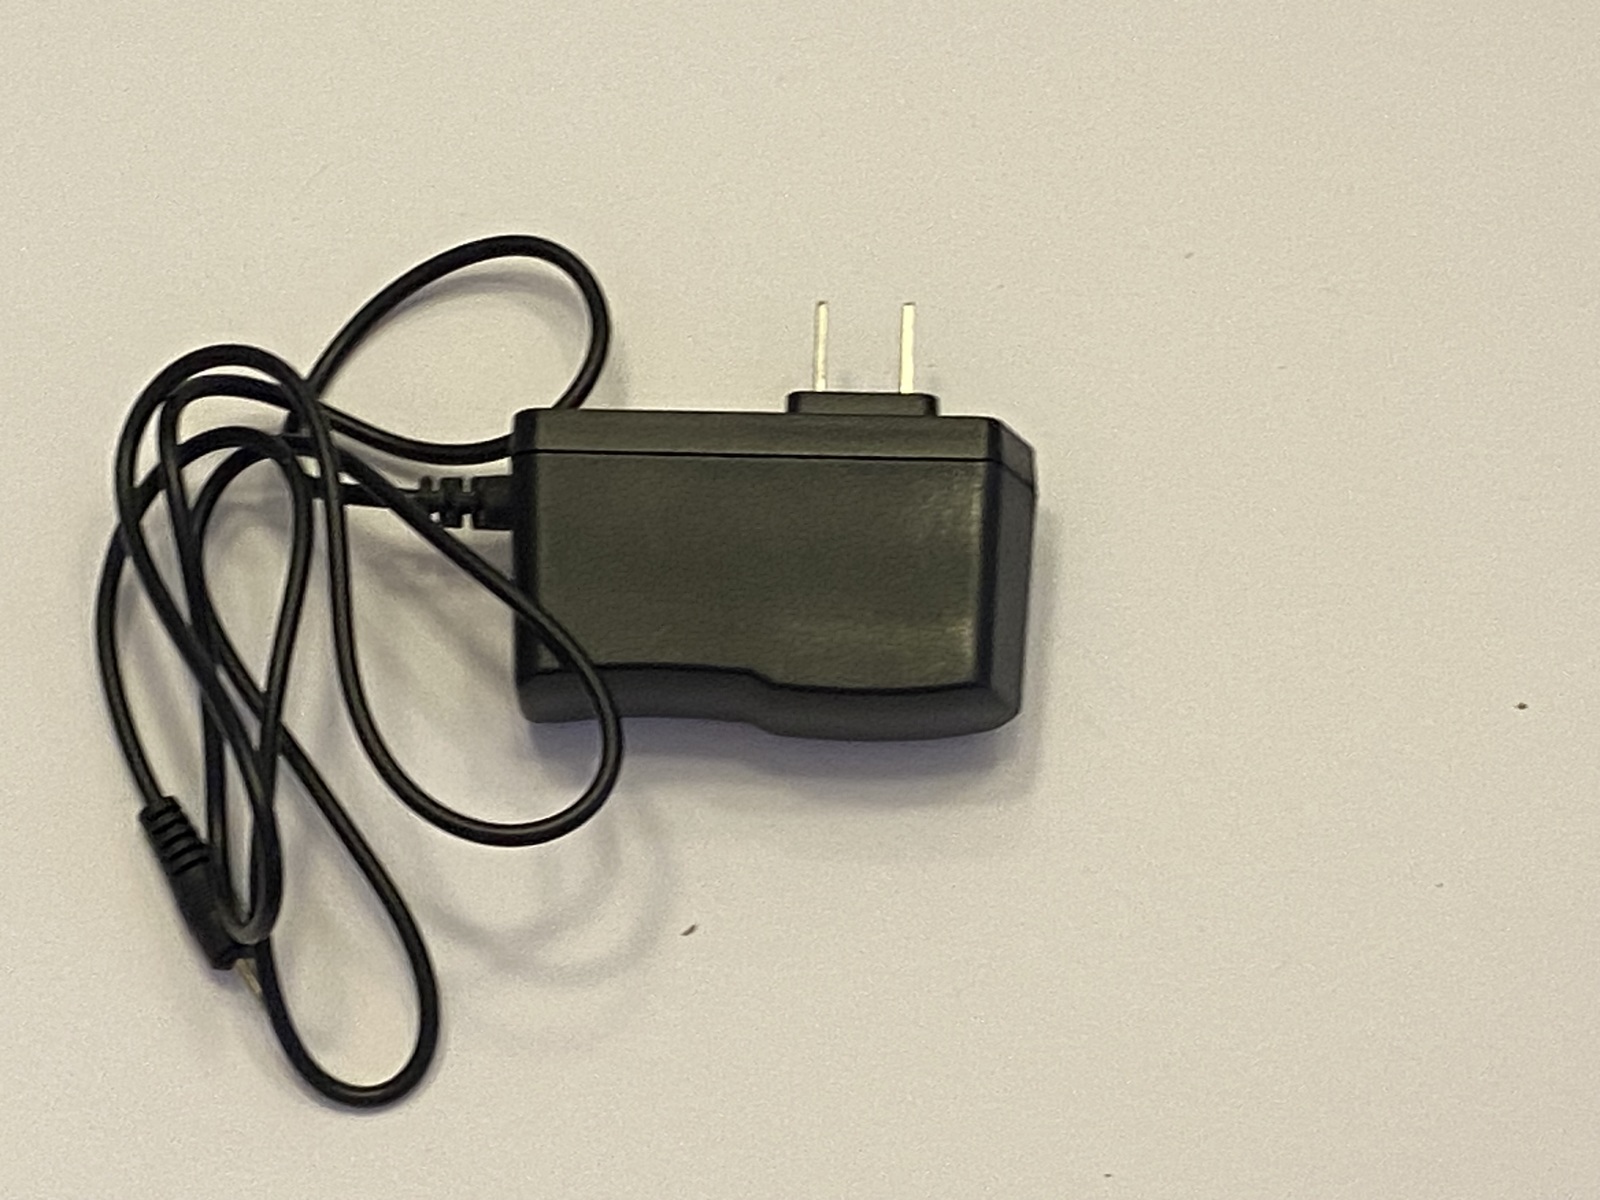 Primary image for 5V 2A AC / DC Adapter for Model: NB1480-4GB  Power Cord  